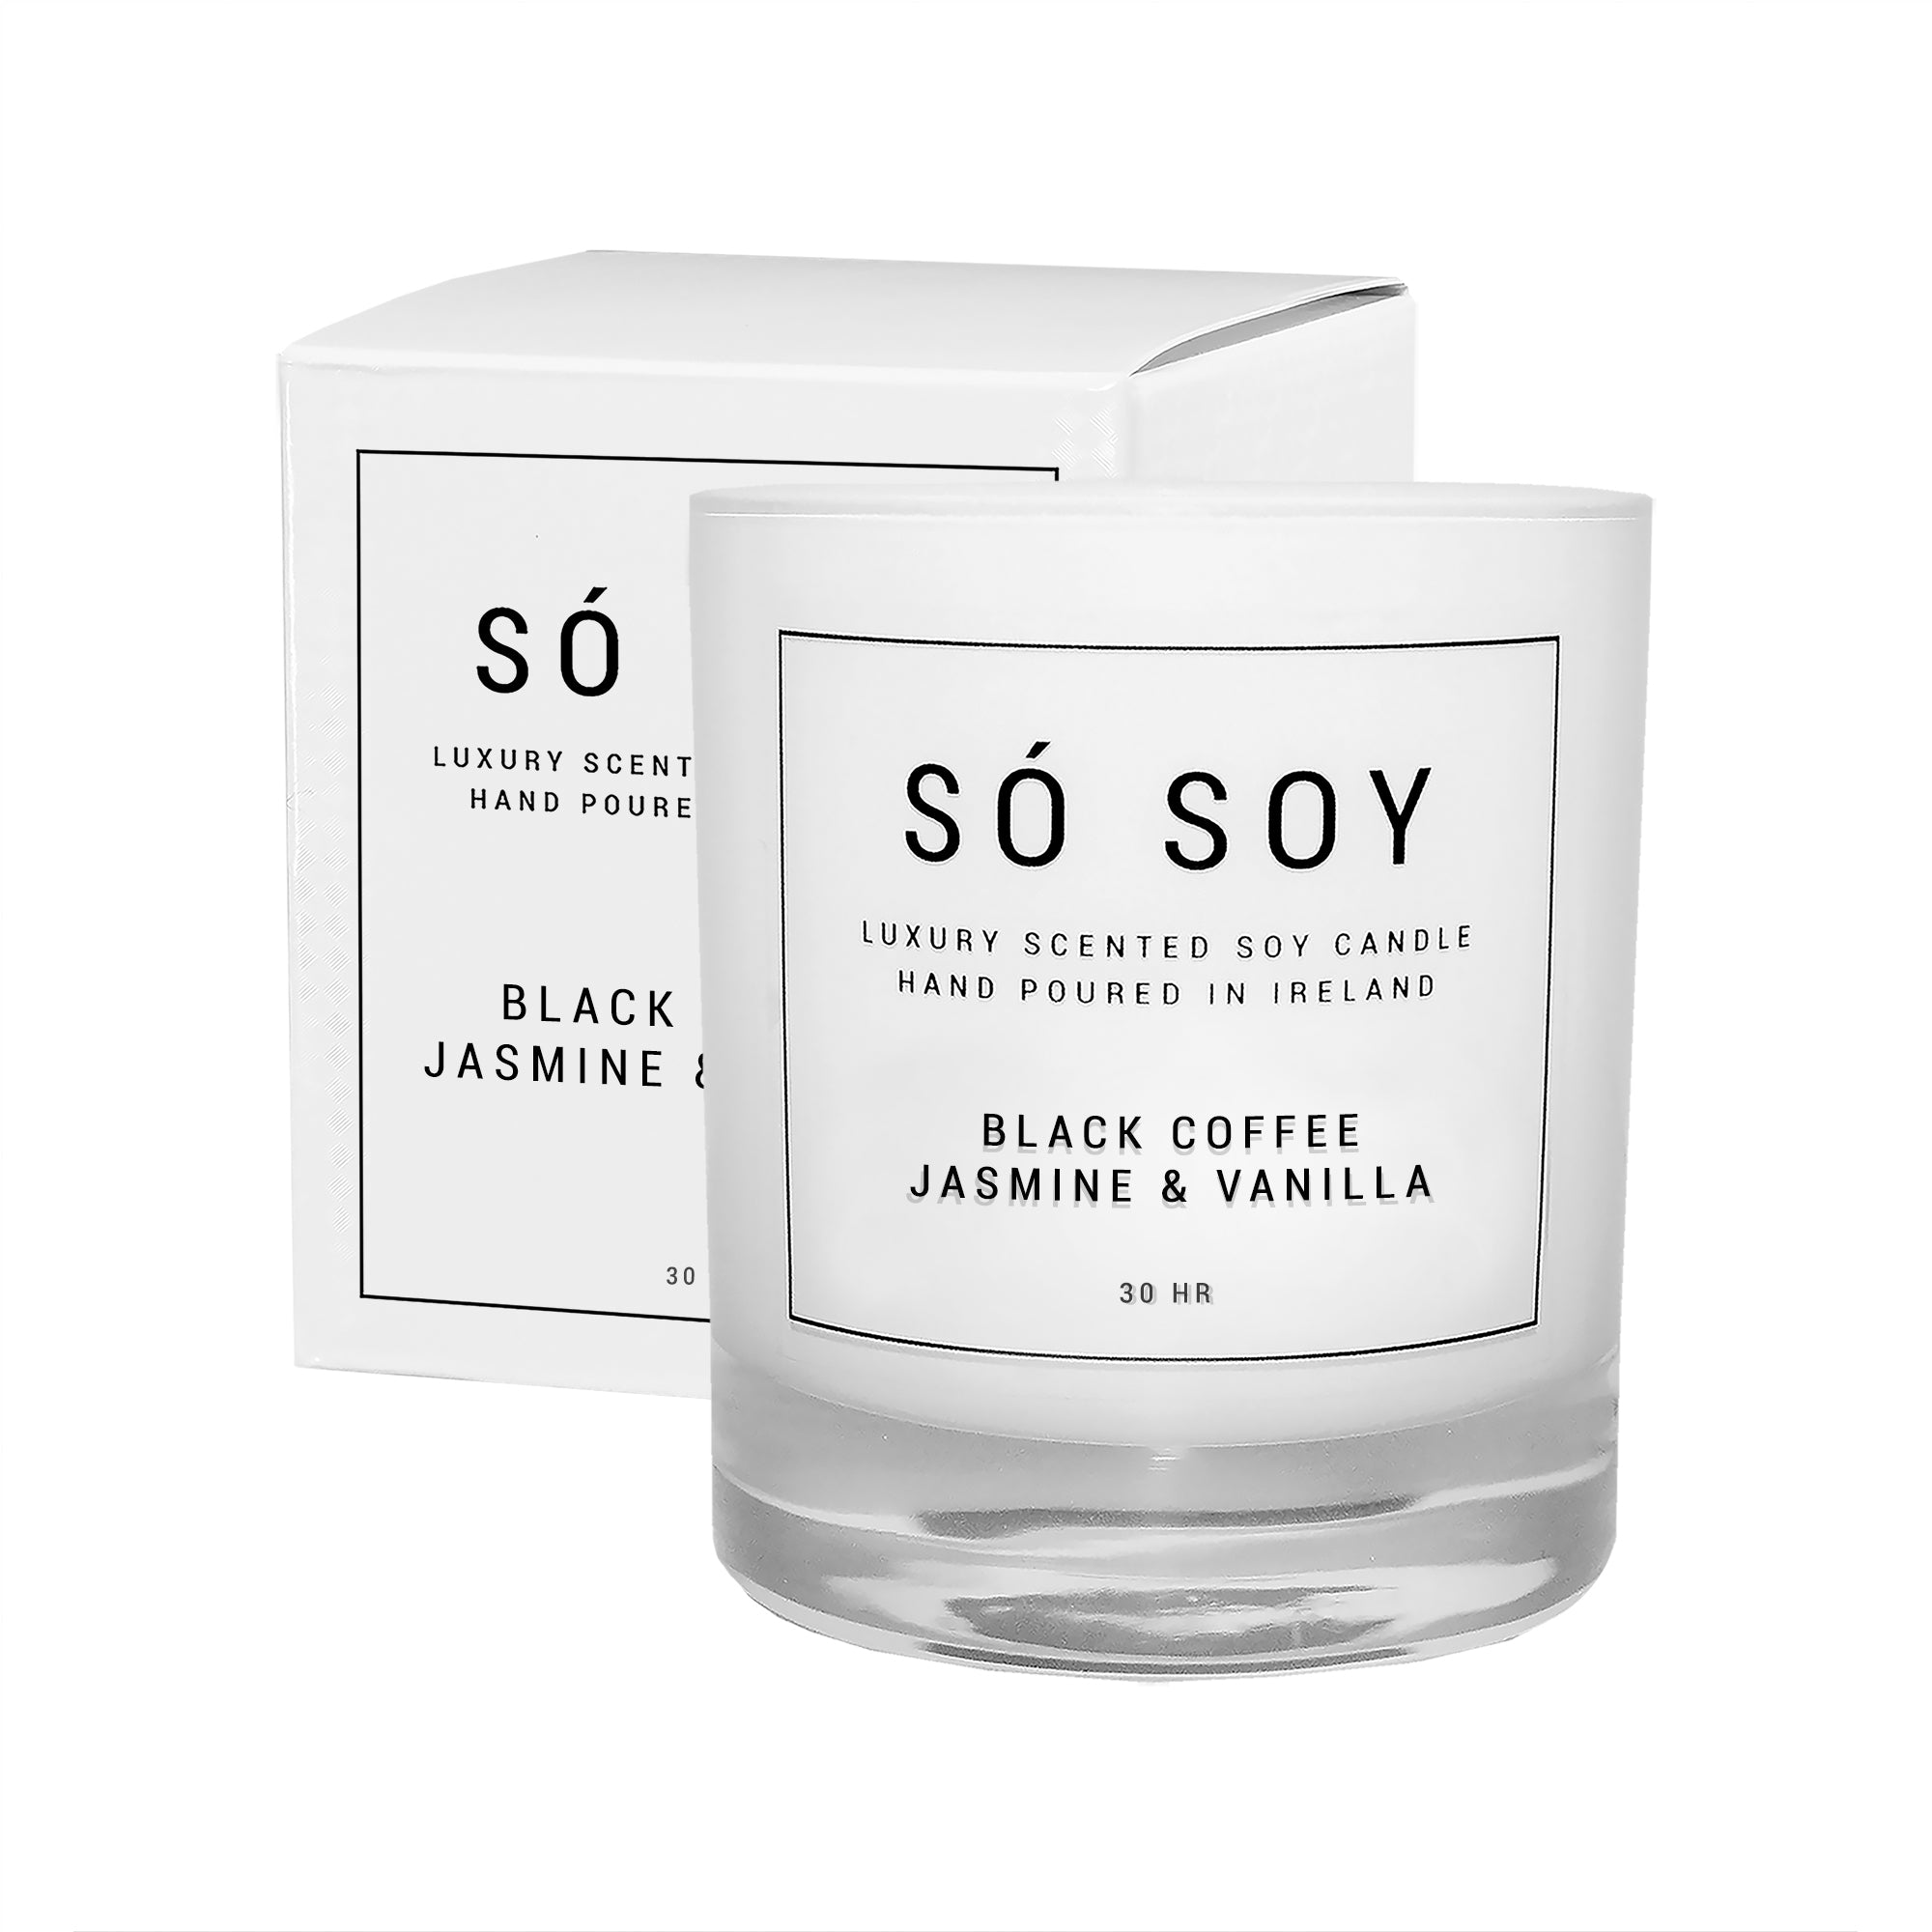 Black Coffee Jasmine and Vanilla Candle by So Soy Hand Poured in Ballymoney